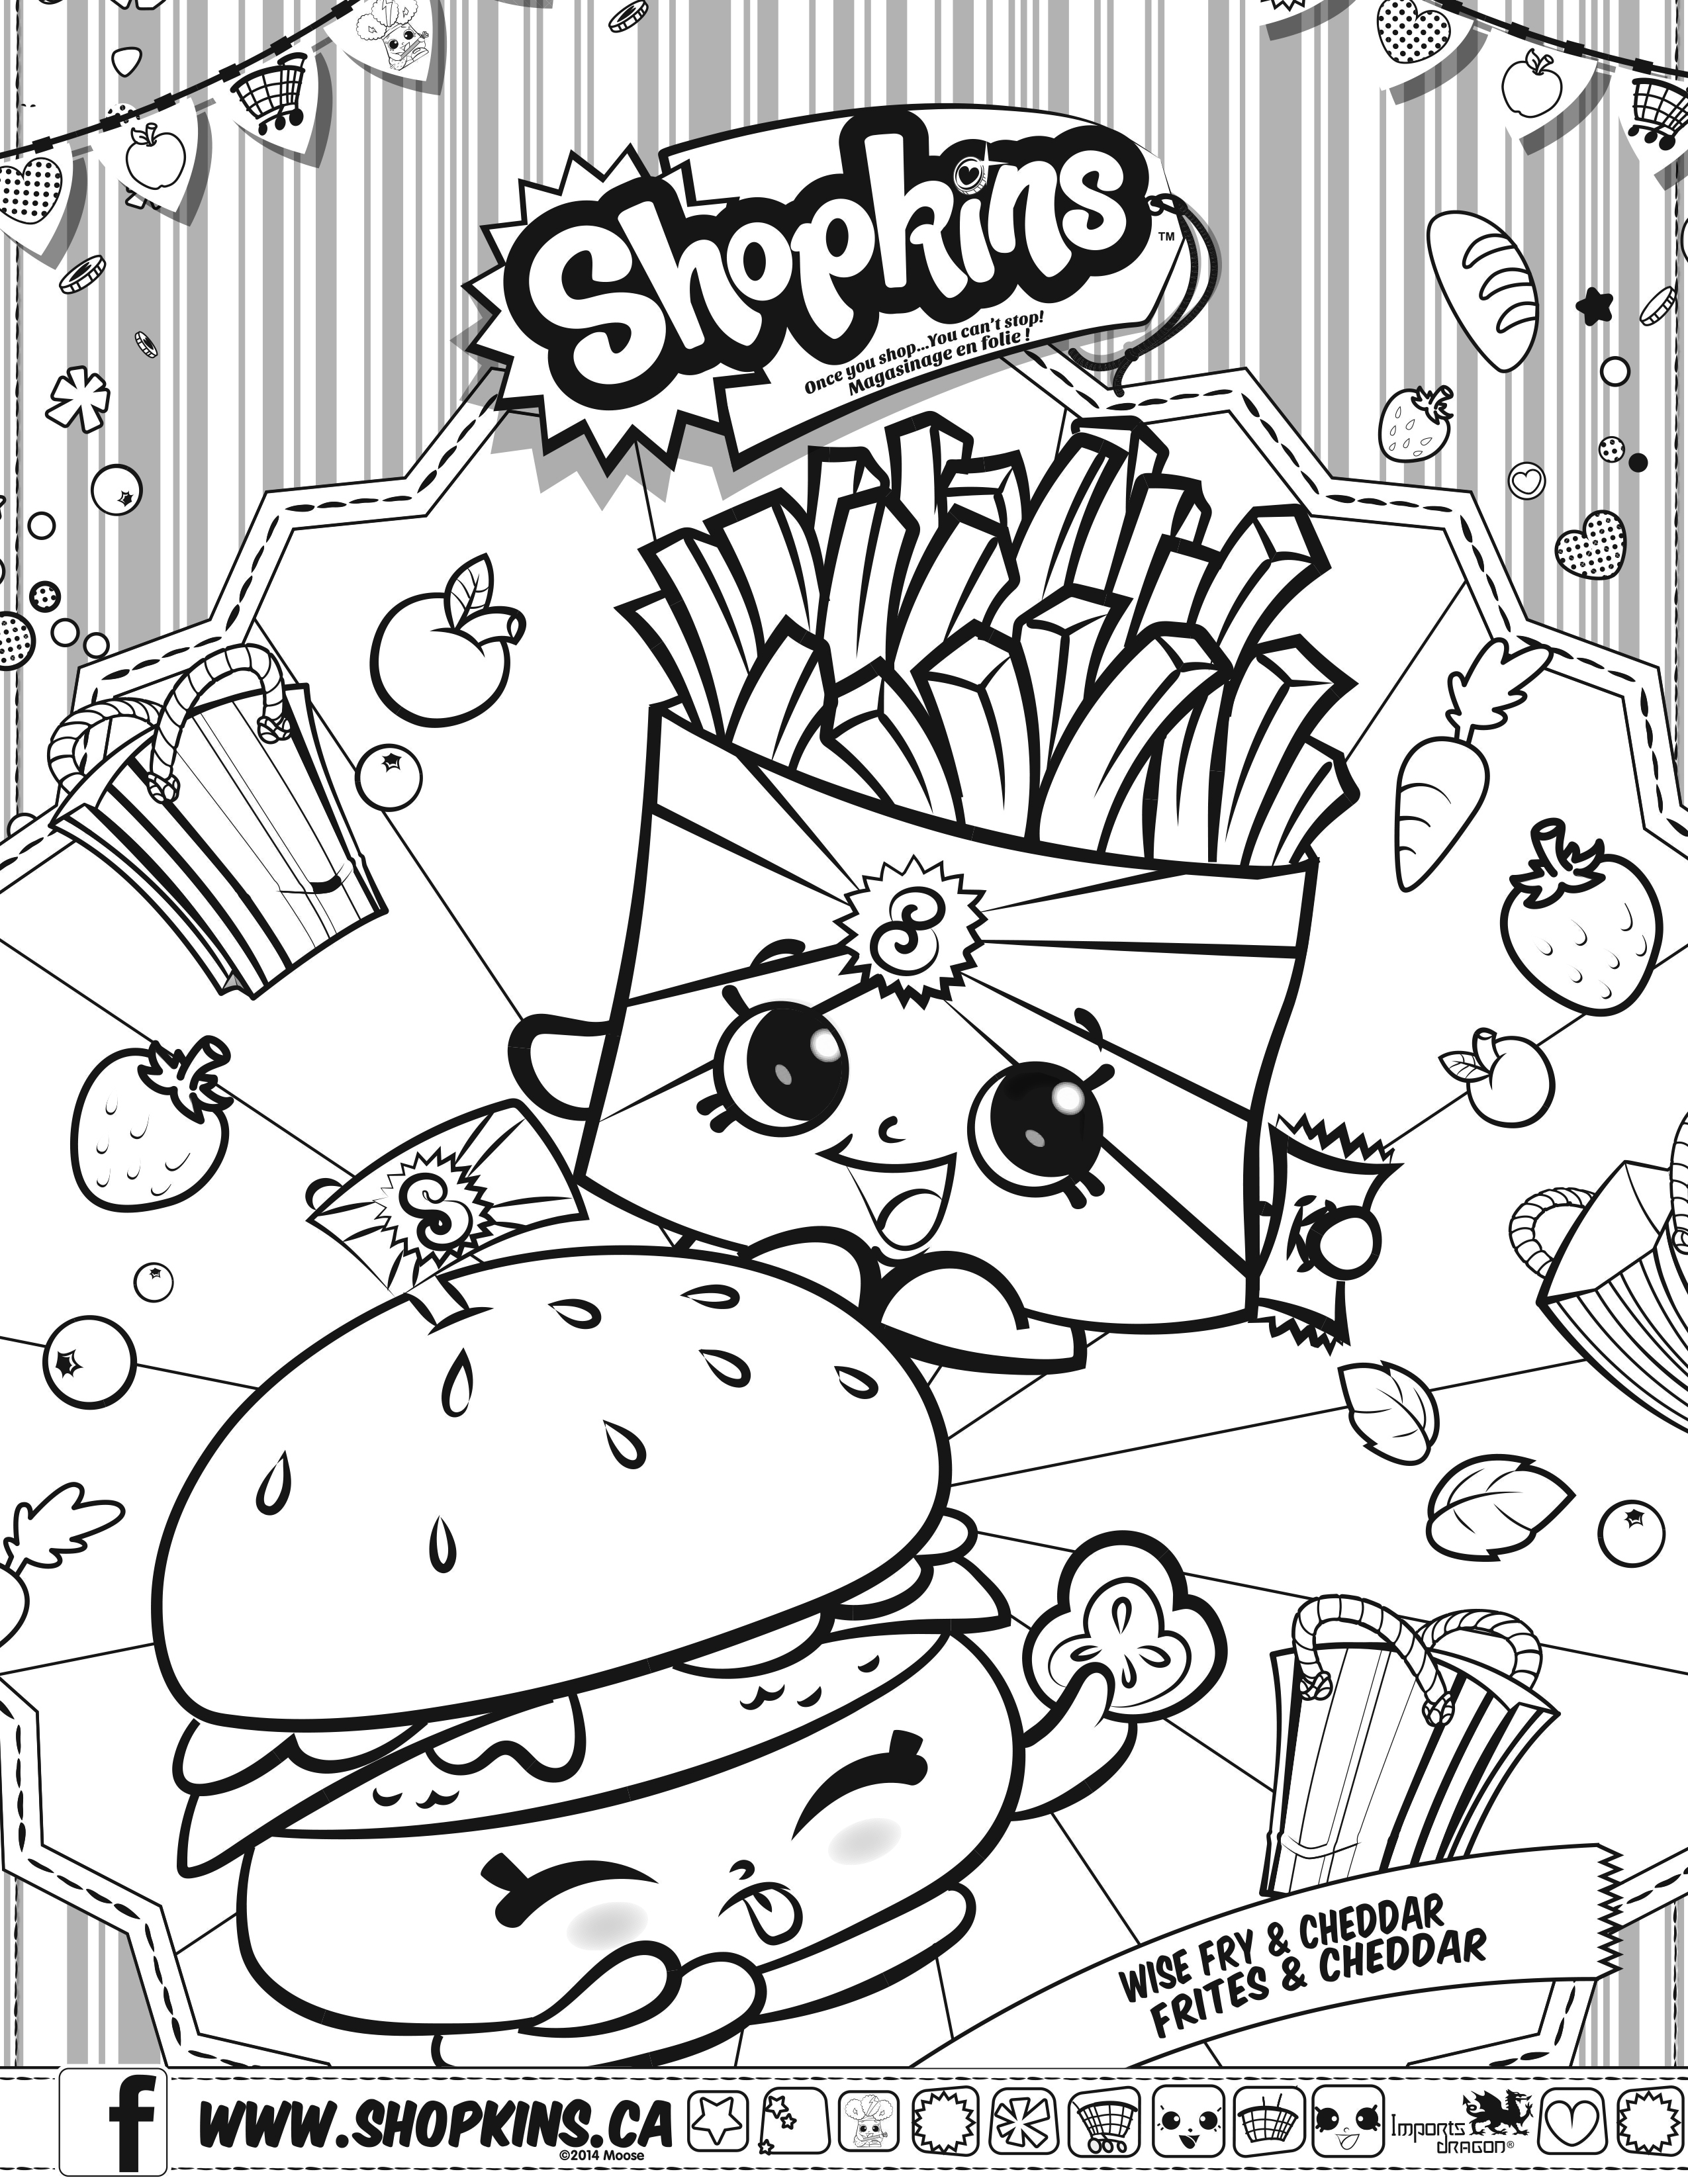 577 Animal Www Shopkins Coloring Pages for Kindergarten